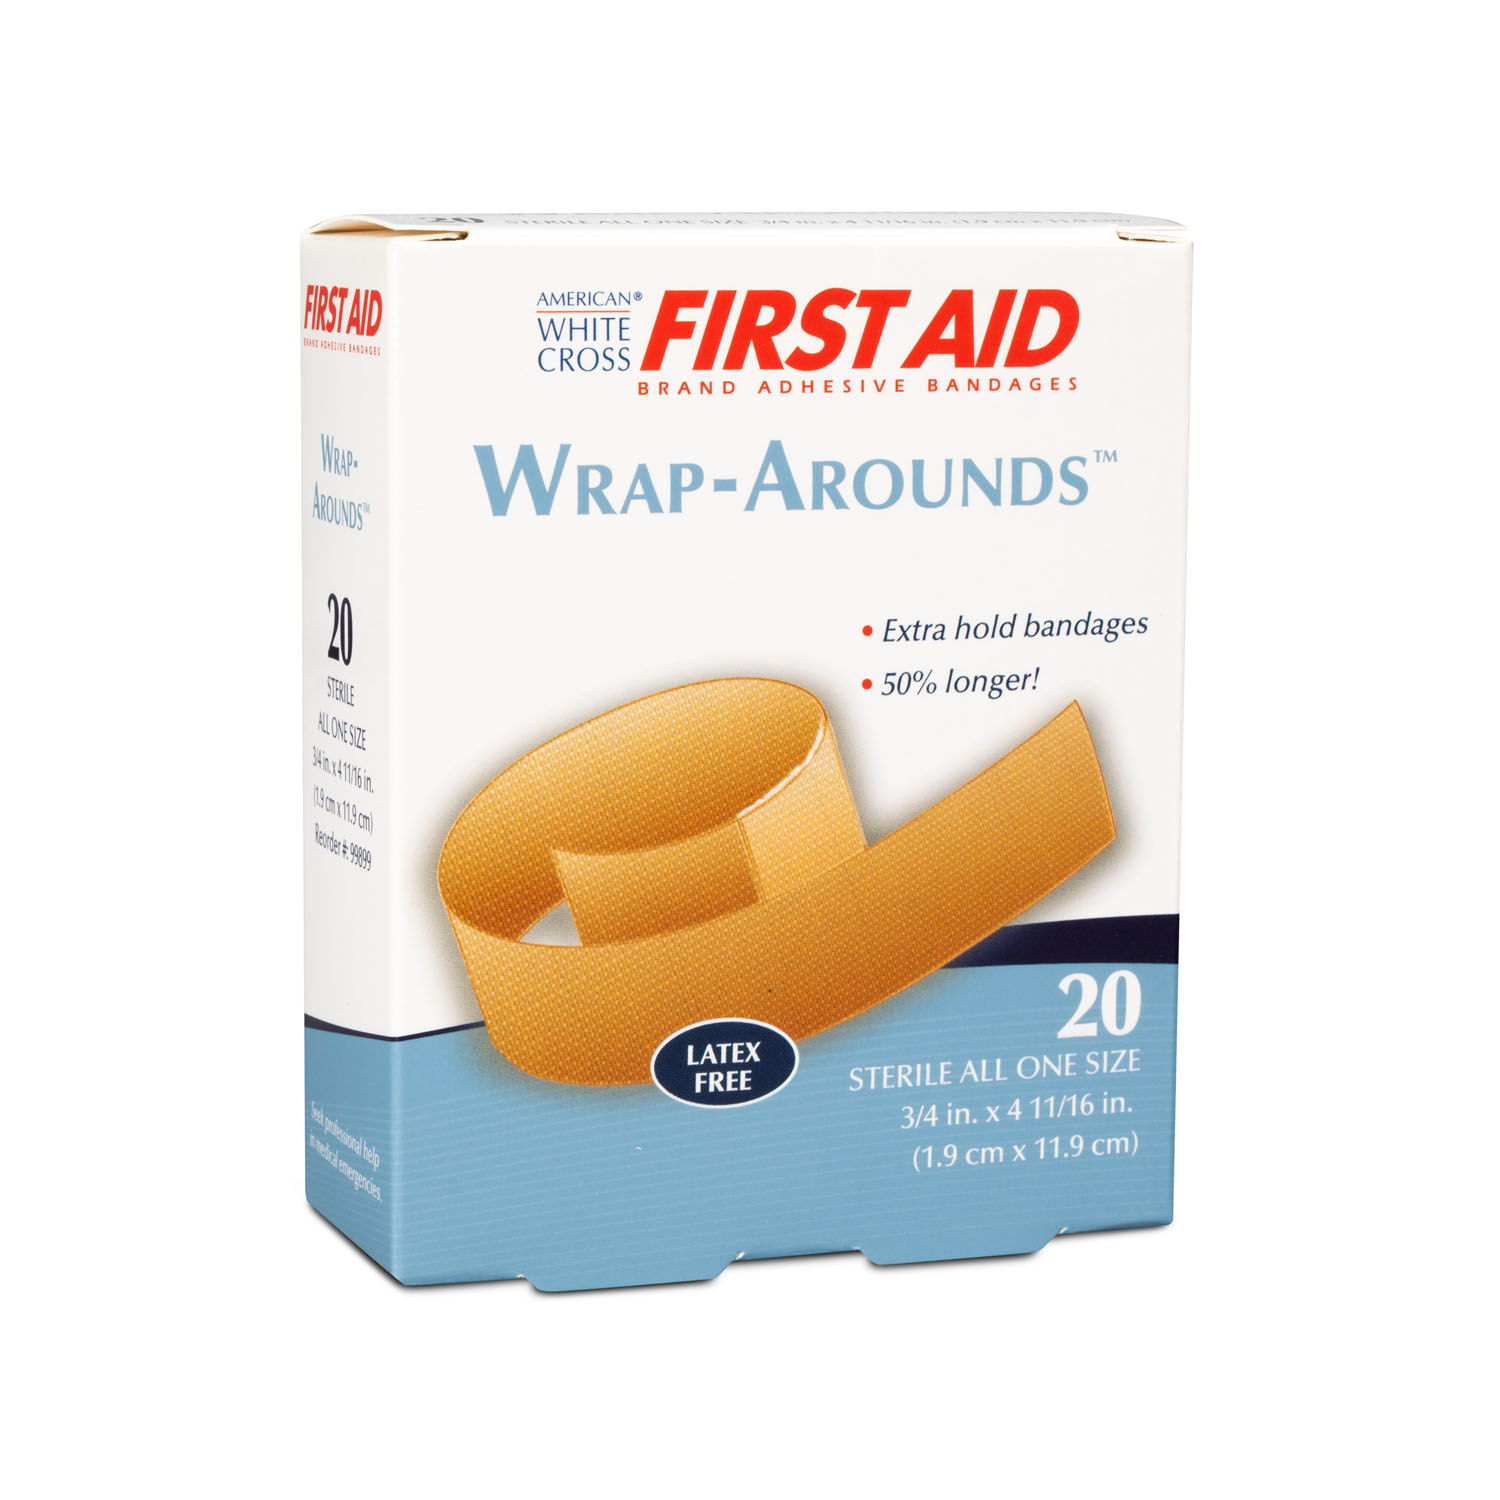 DUKAL FIRST AID® ADHESIVE BANDAGES : 99899 BX